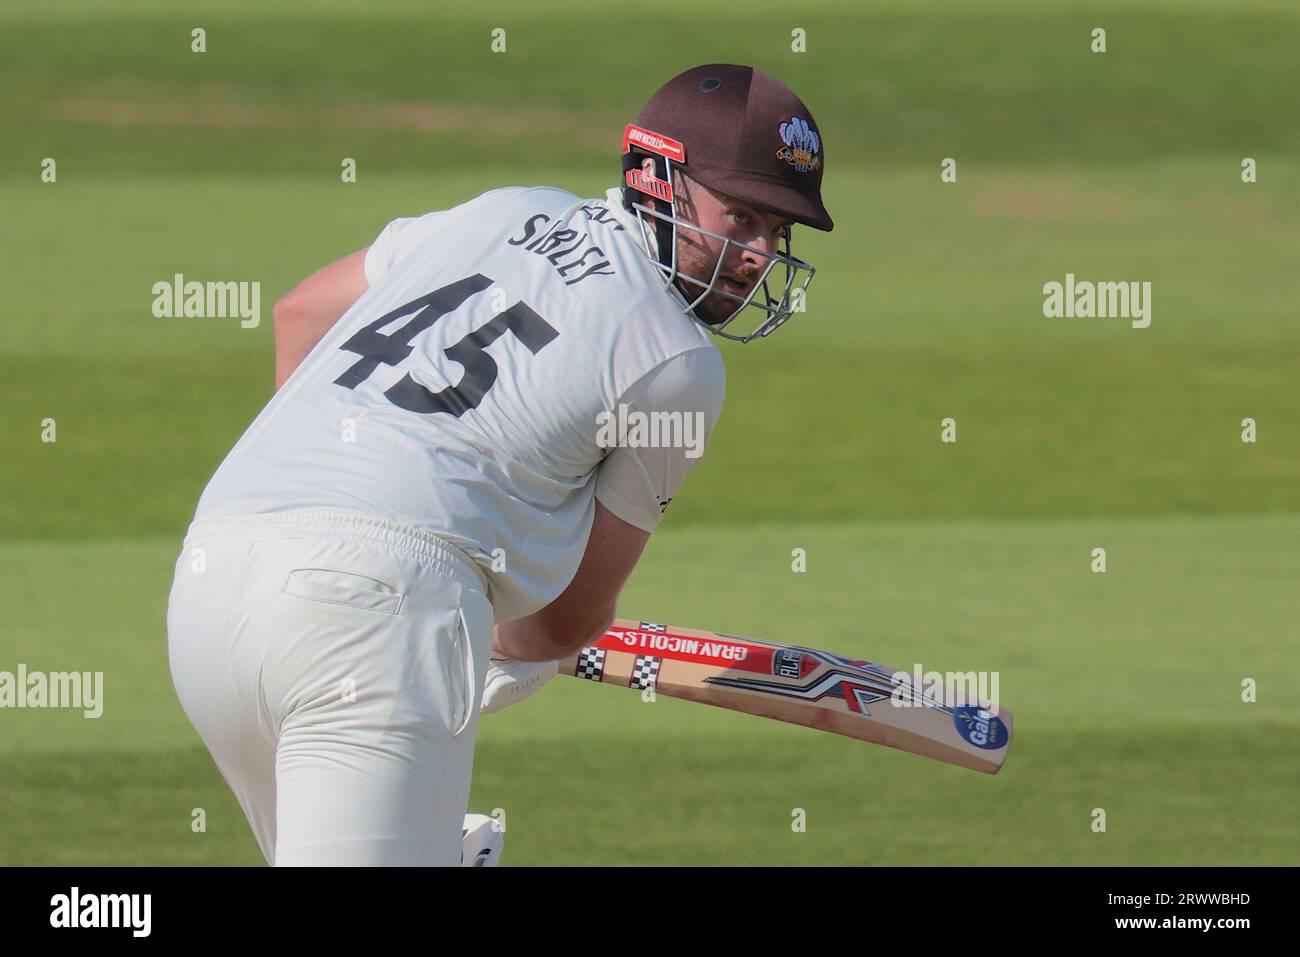 London, UK. 21st Sep, 2023. Surrey's Dom Sibley batting as Surrey take on Northamptonshire in the County Championship at the Kia Oval, day three. Credit: David Rowe/Alamy Live News Stock Photo